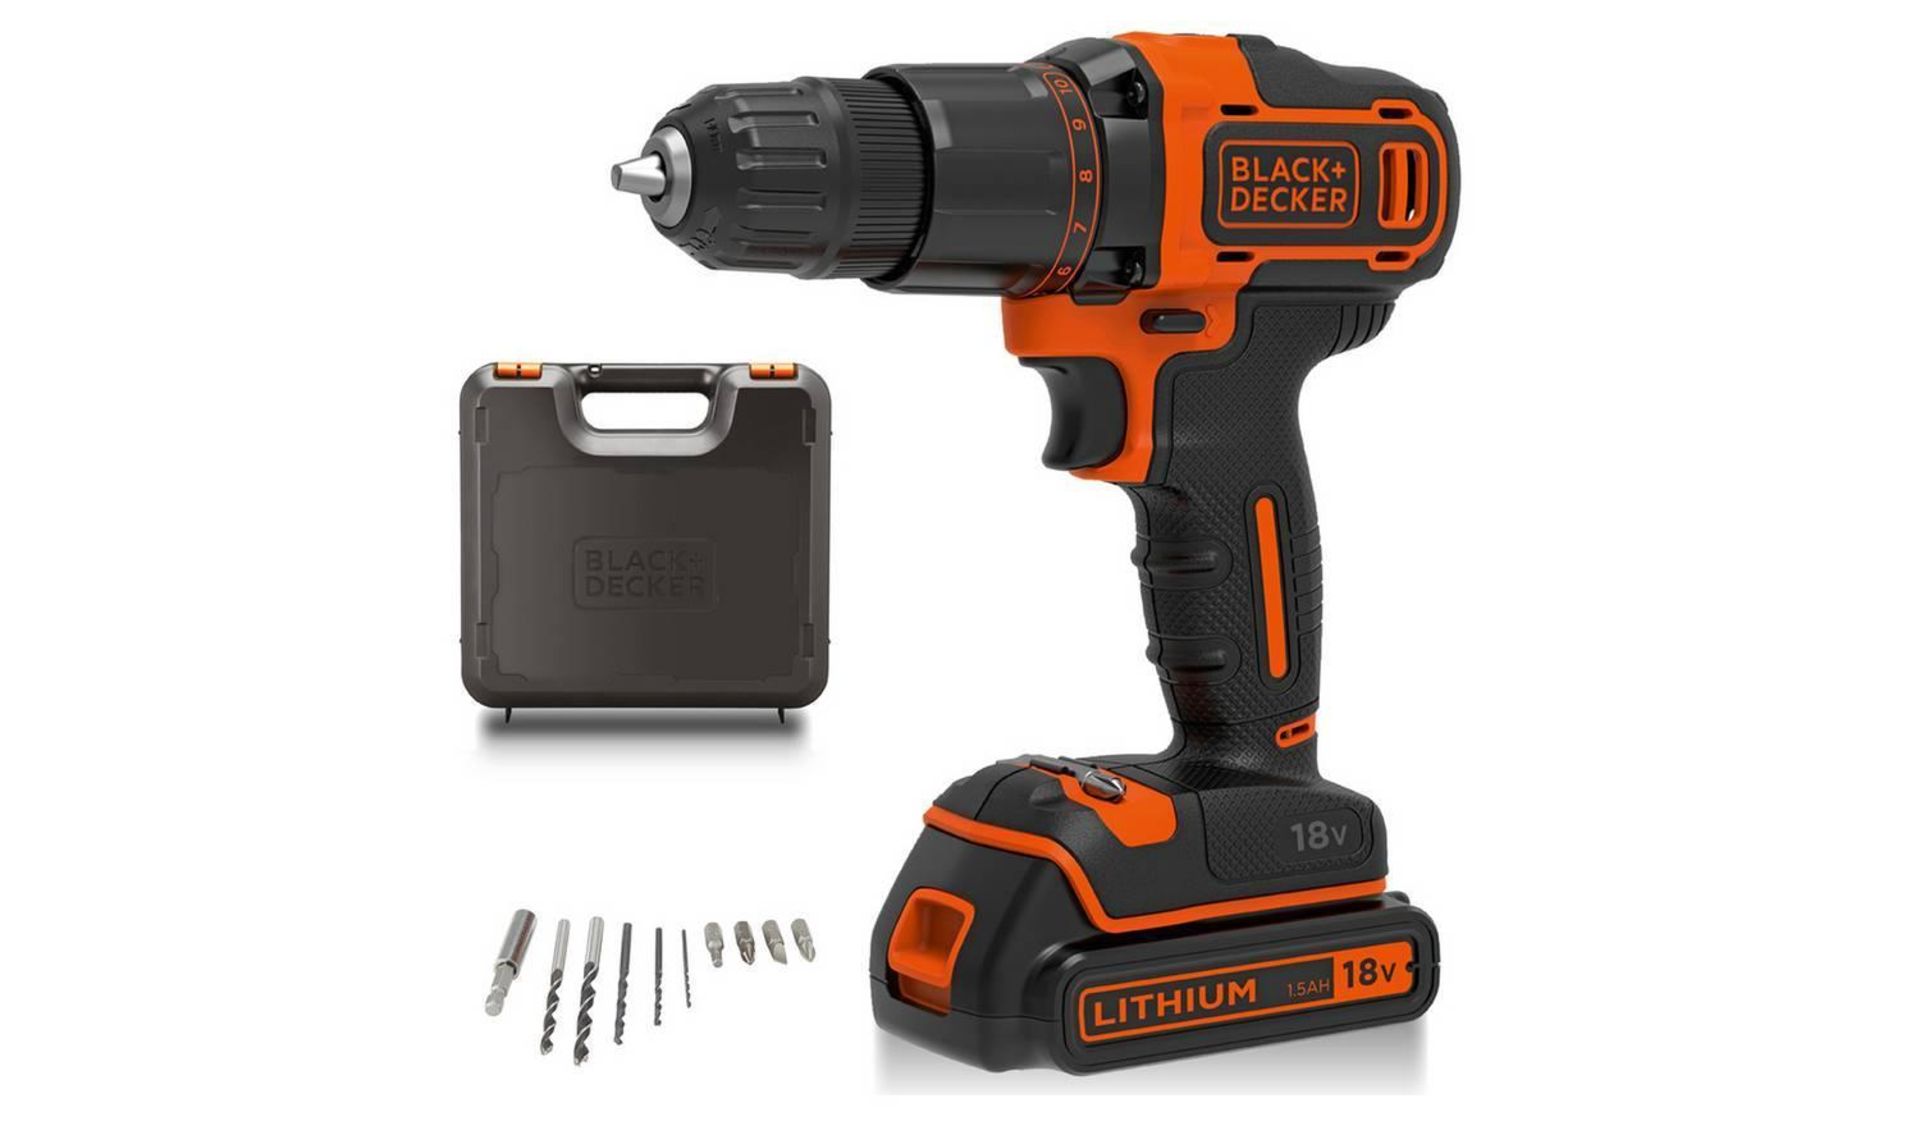 Black + Decker Cordless Hammer Drill with Battery - 18V, £50.00 RRP